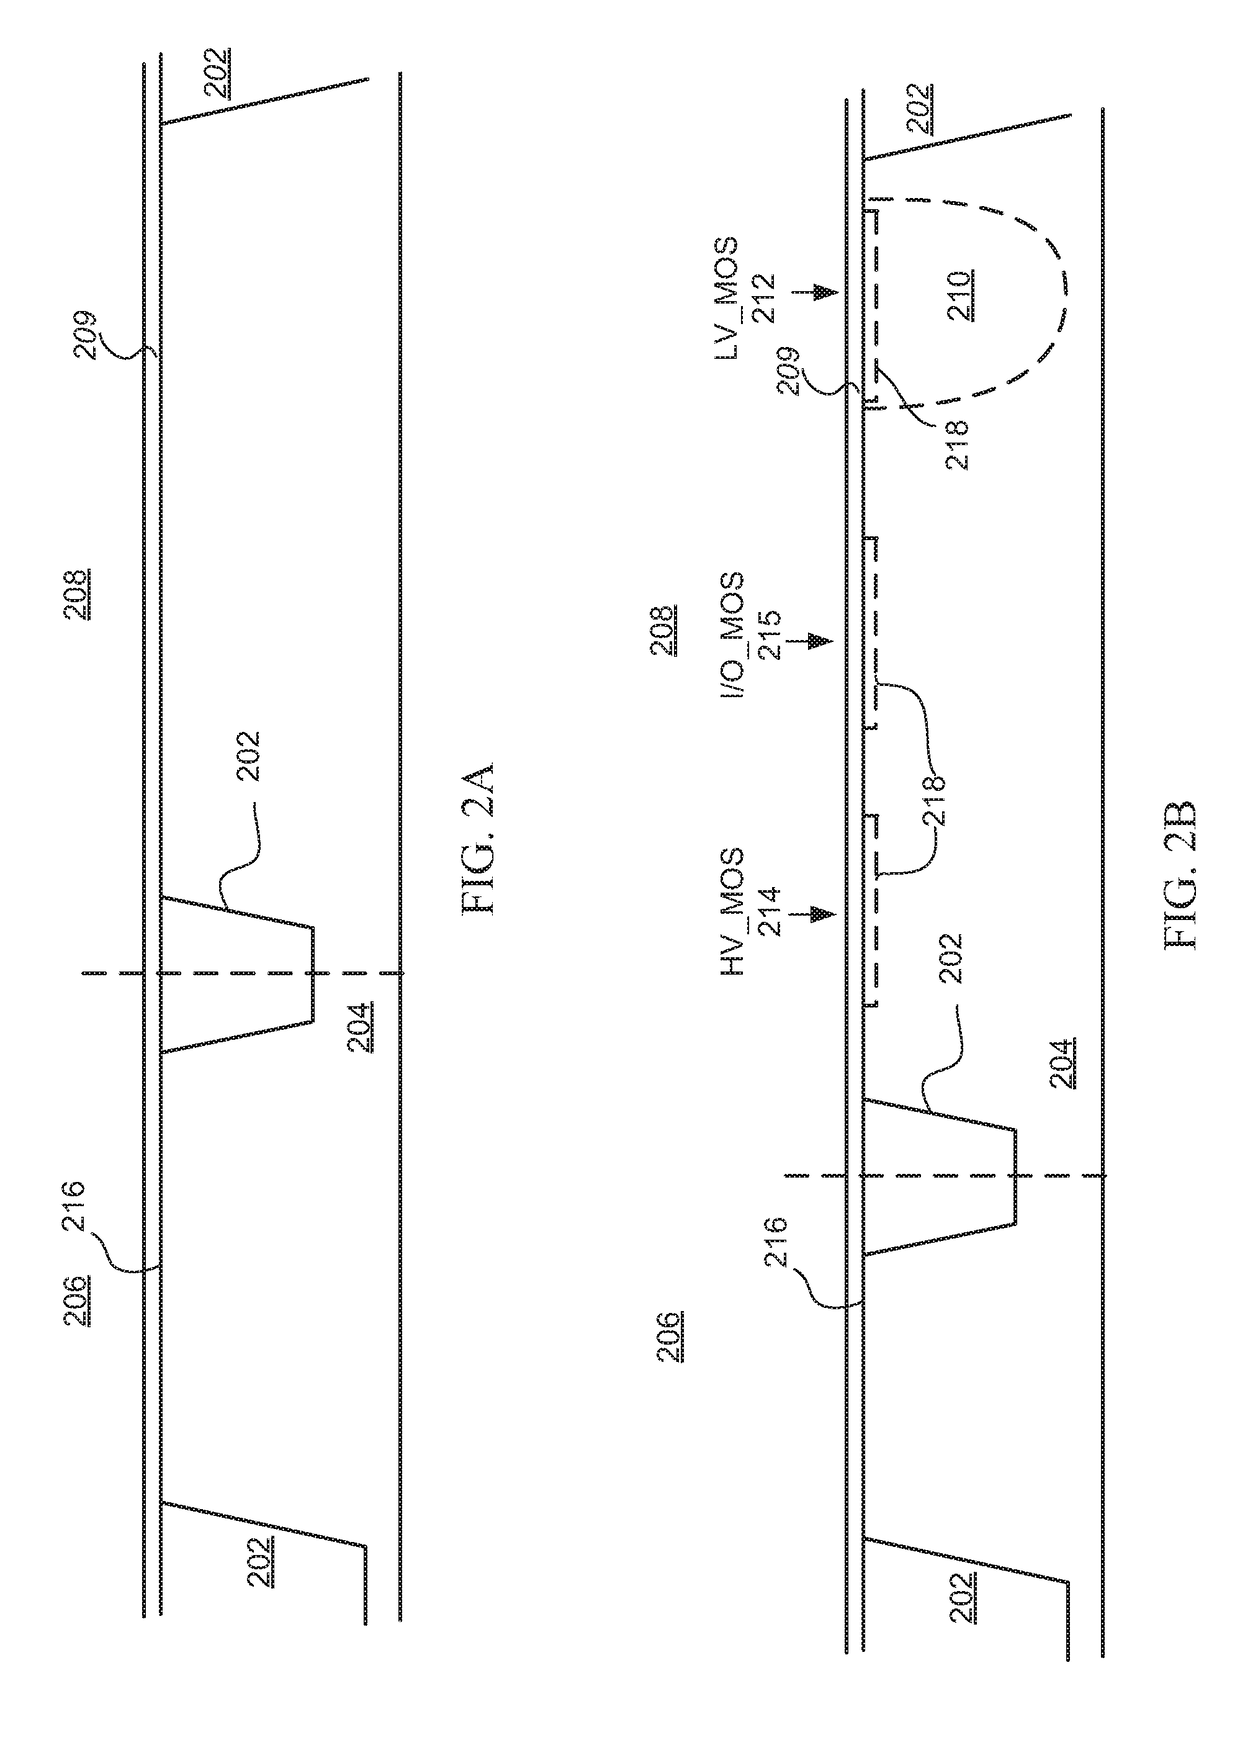 Embedded SONOS with triple gate oxide and manufacturing method of the same